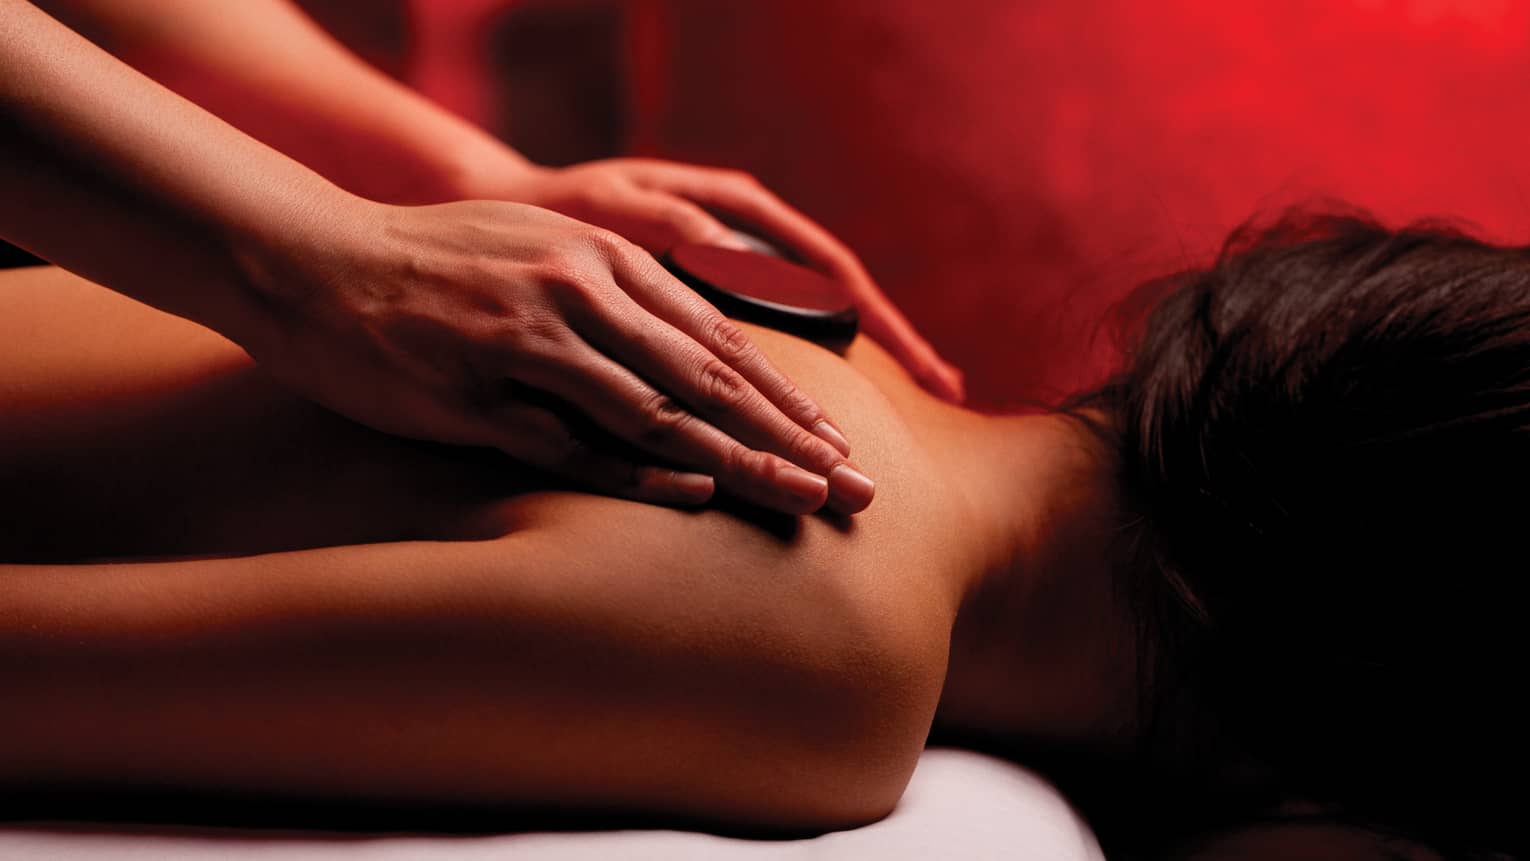 Hands rub woman's bare shoulders during Fusion Massage in spa